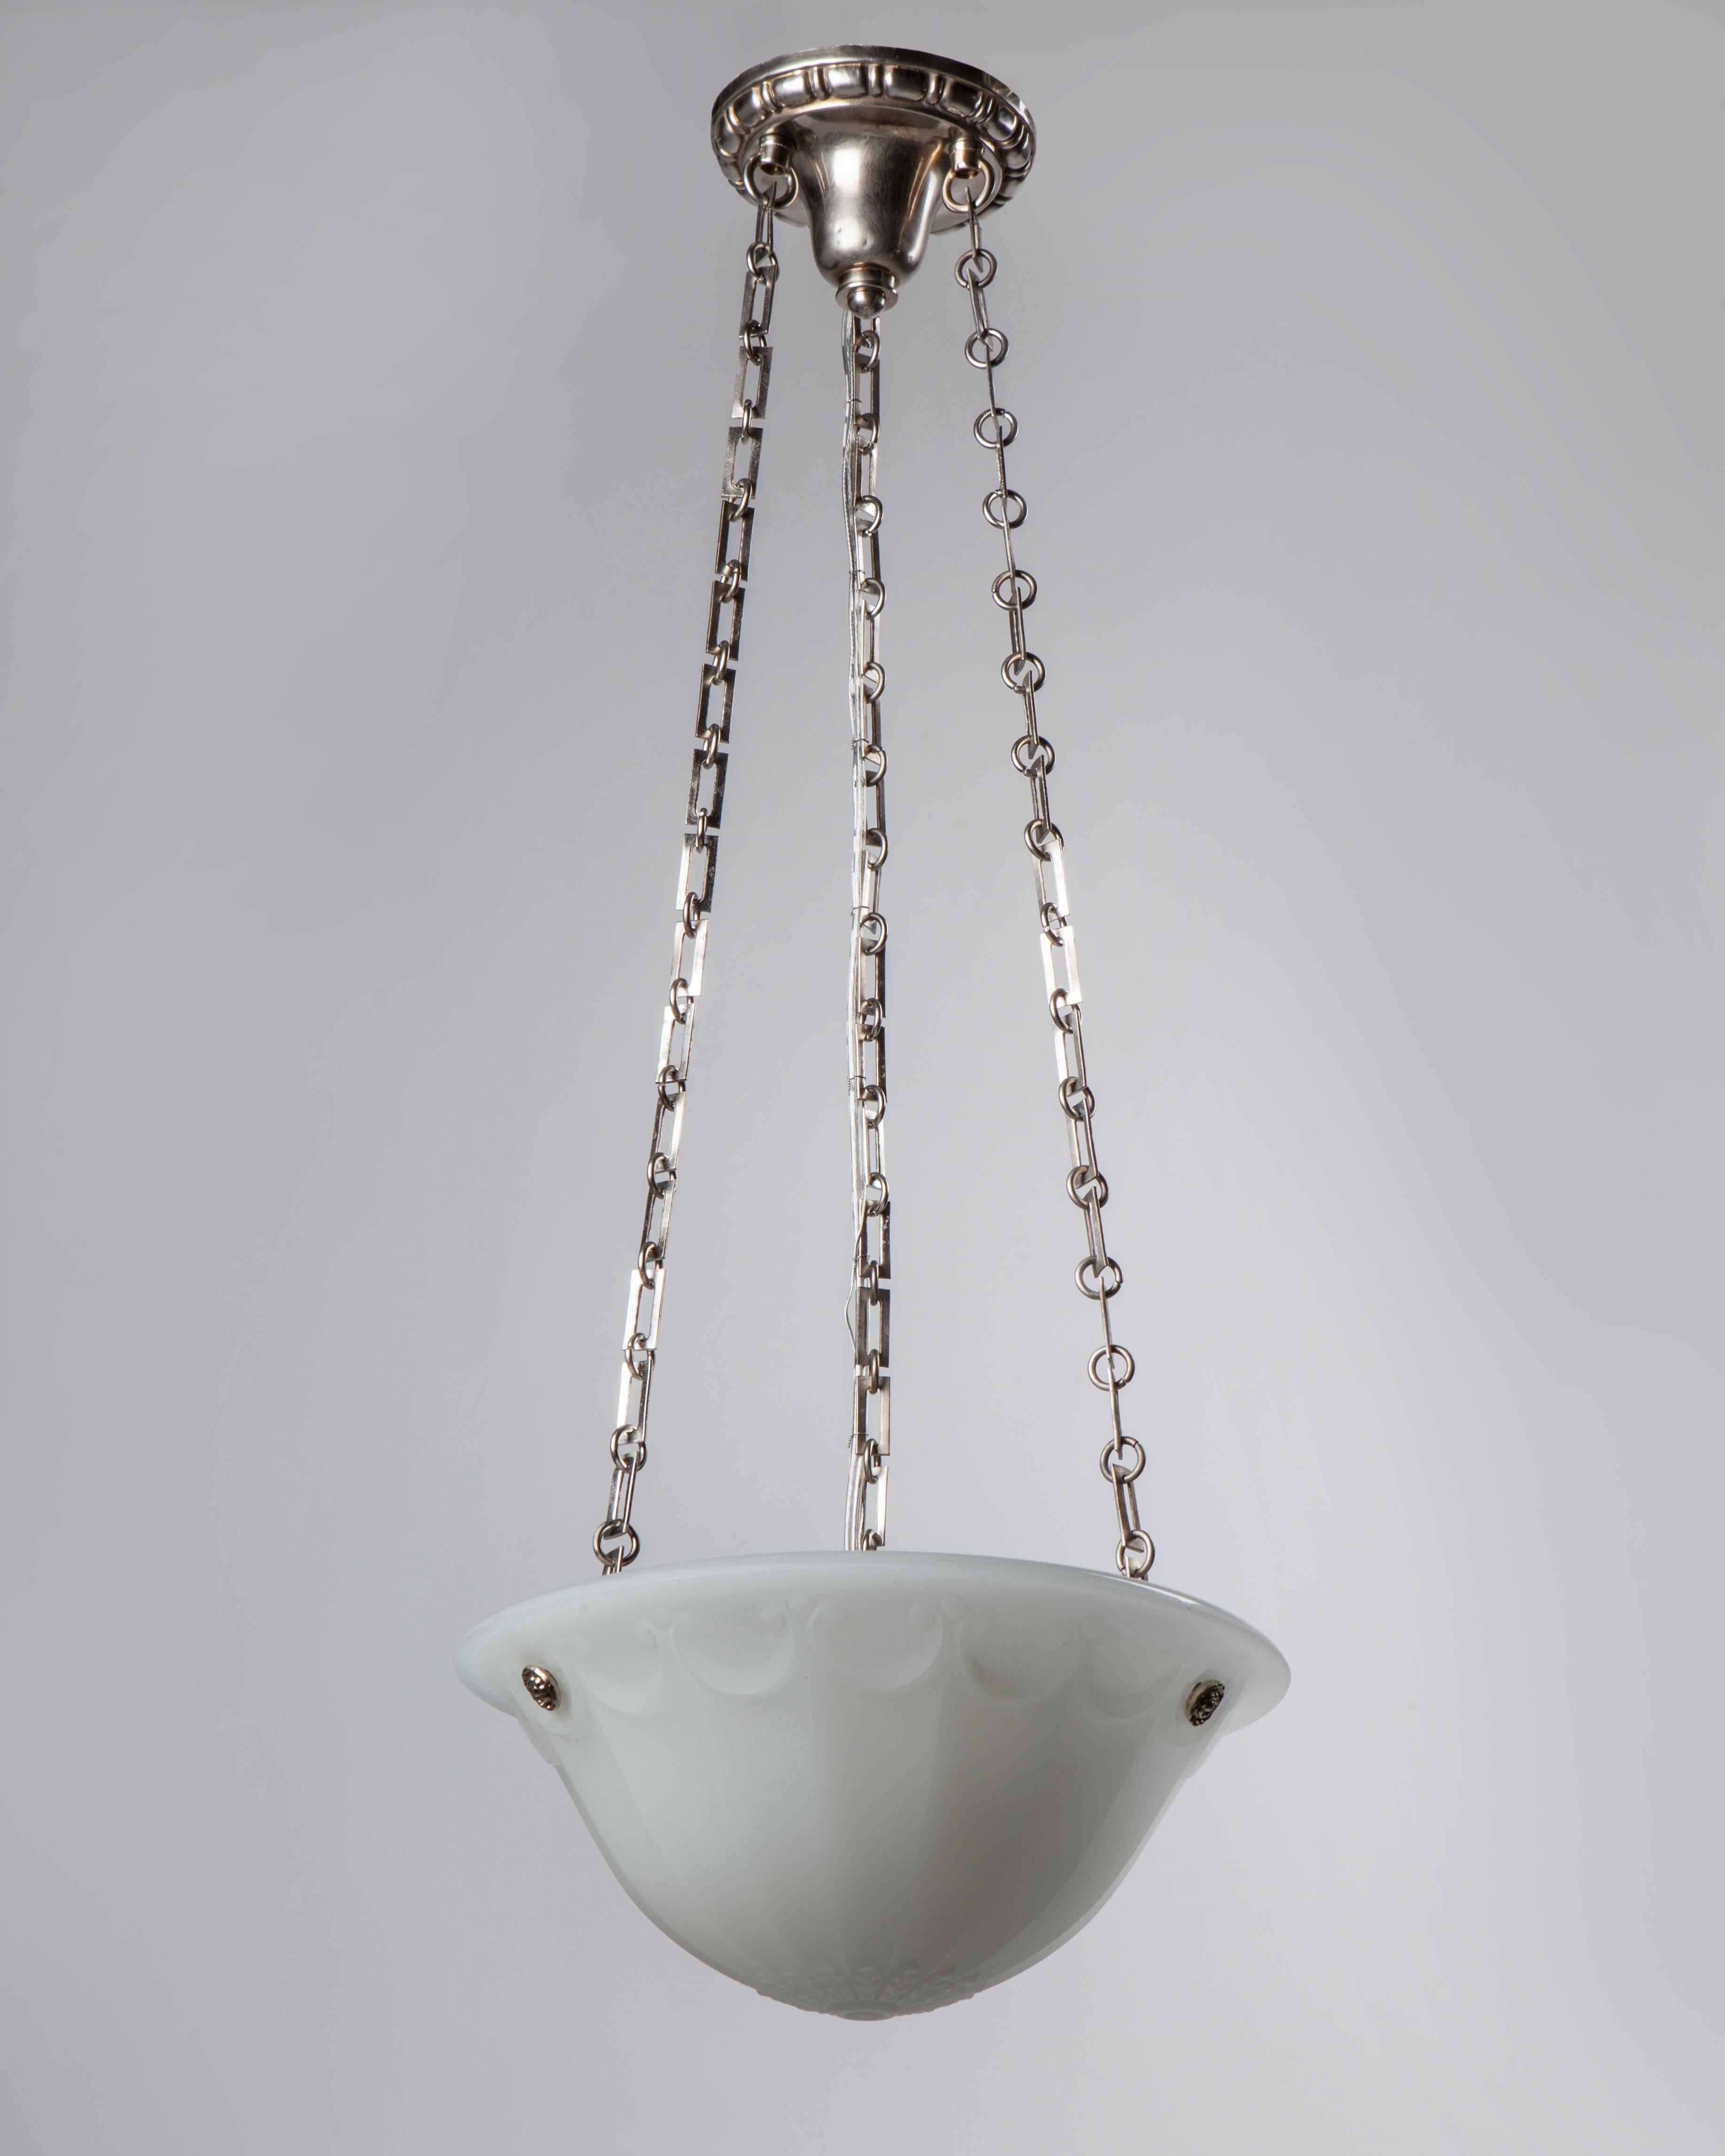 AHL3964

A petite cast opaline glass chandelier with darkened nickel metalwork, circa 1910. Due to the antique nature of this fixture, there may be some nicks or imperfections in the glass as well as variations from piece to